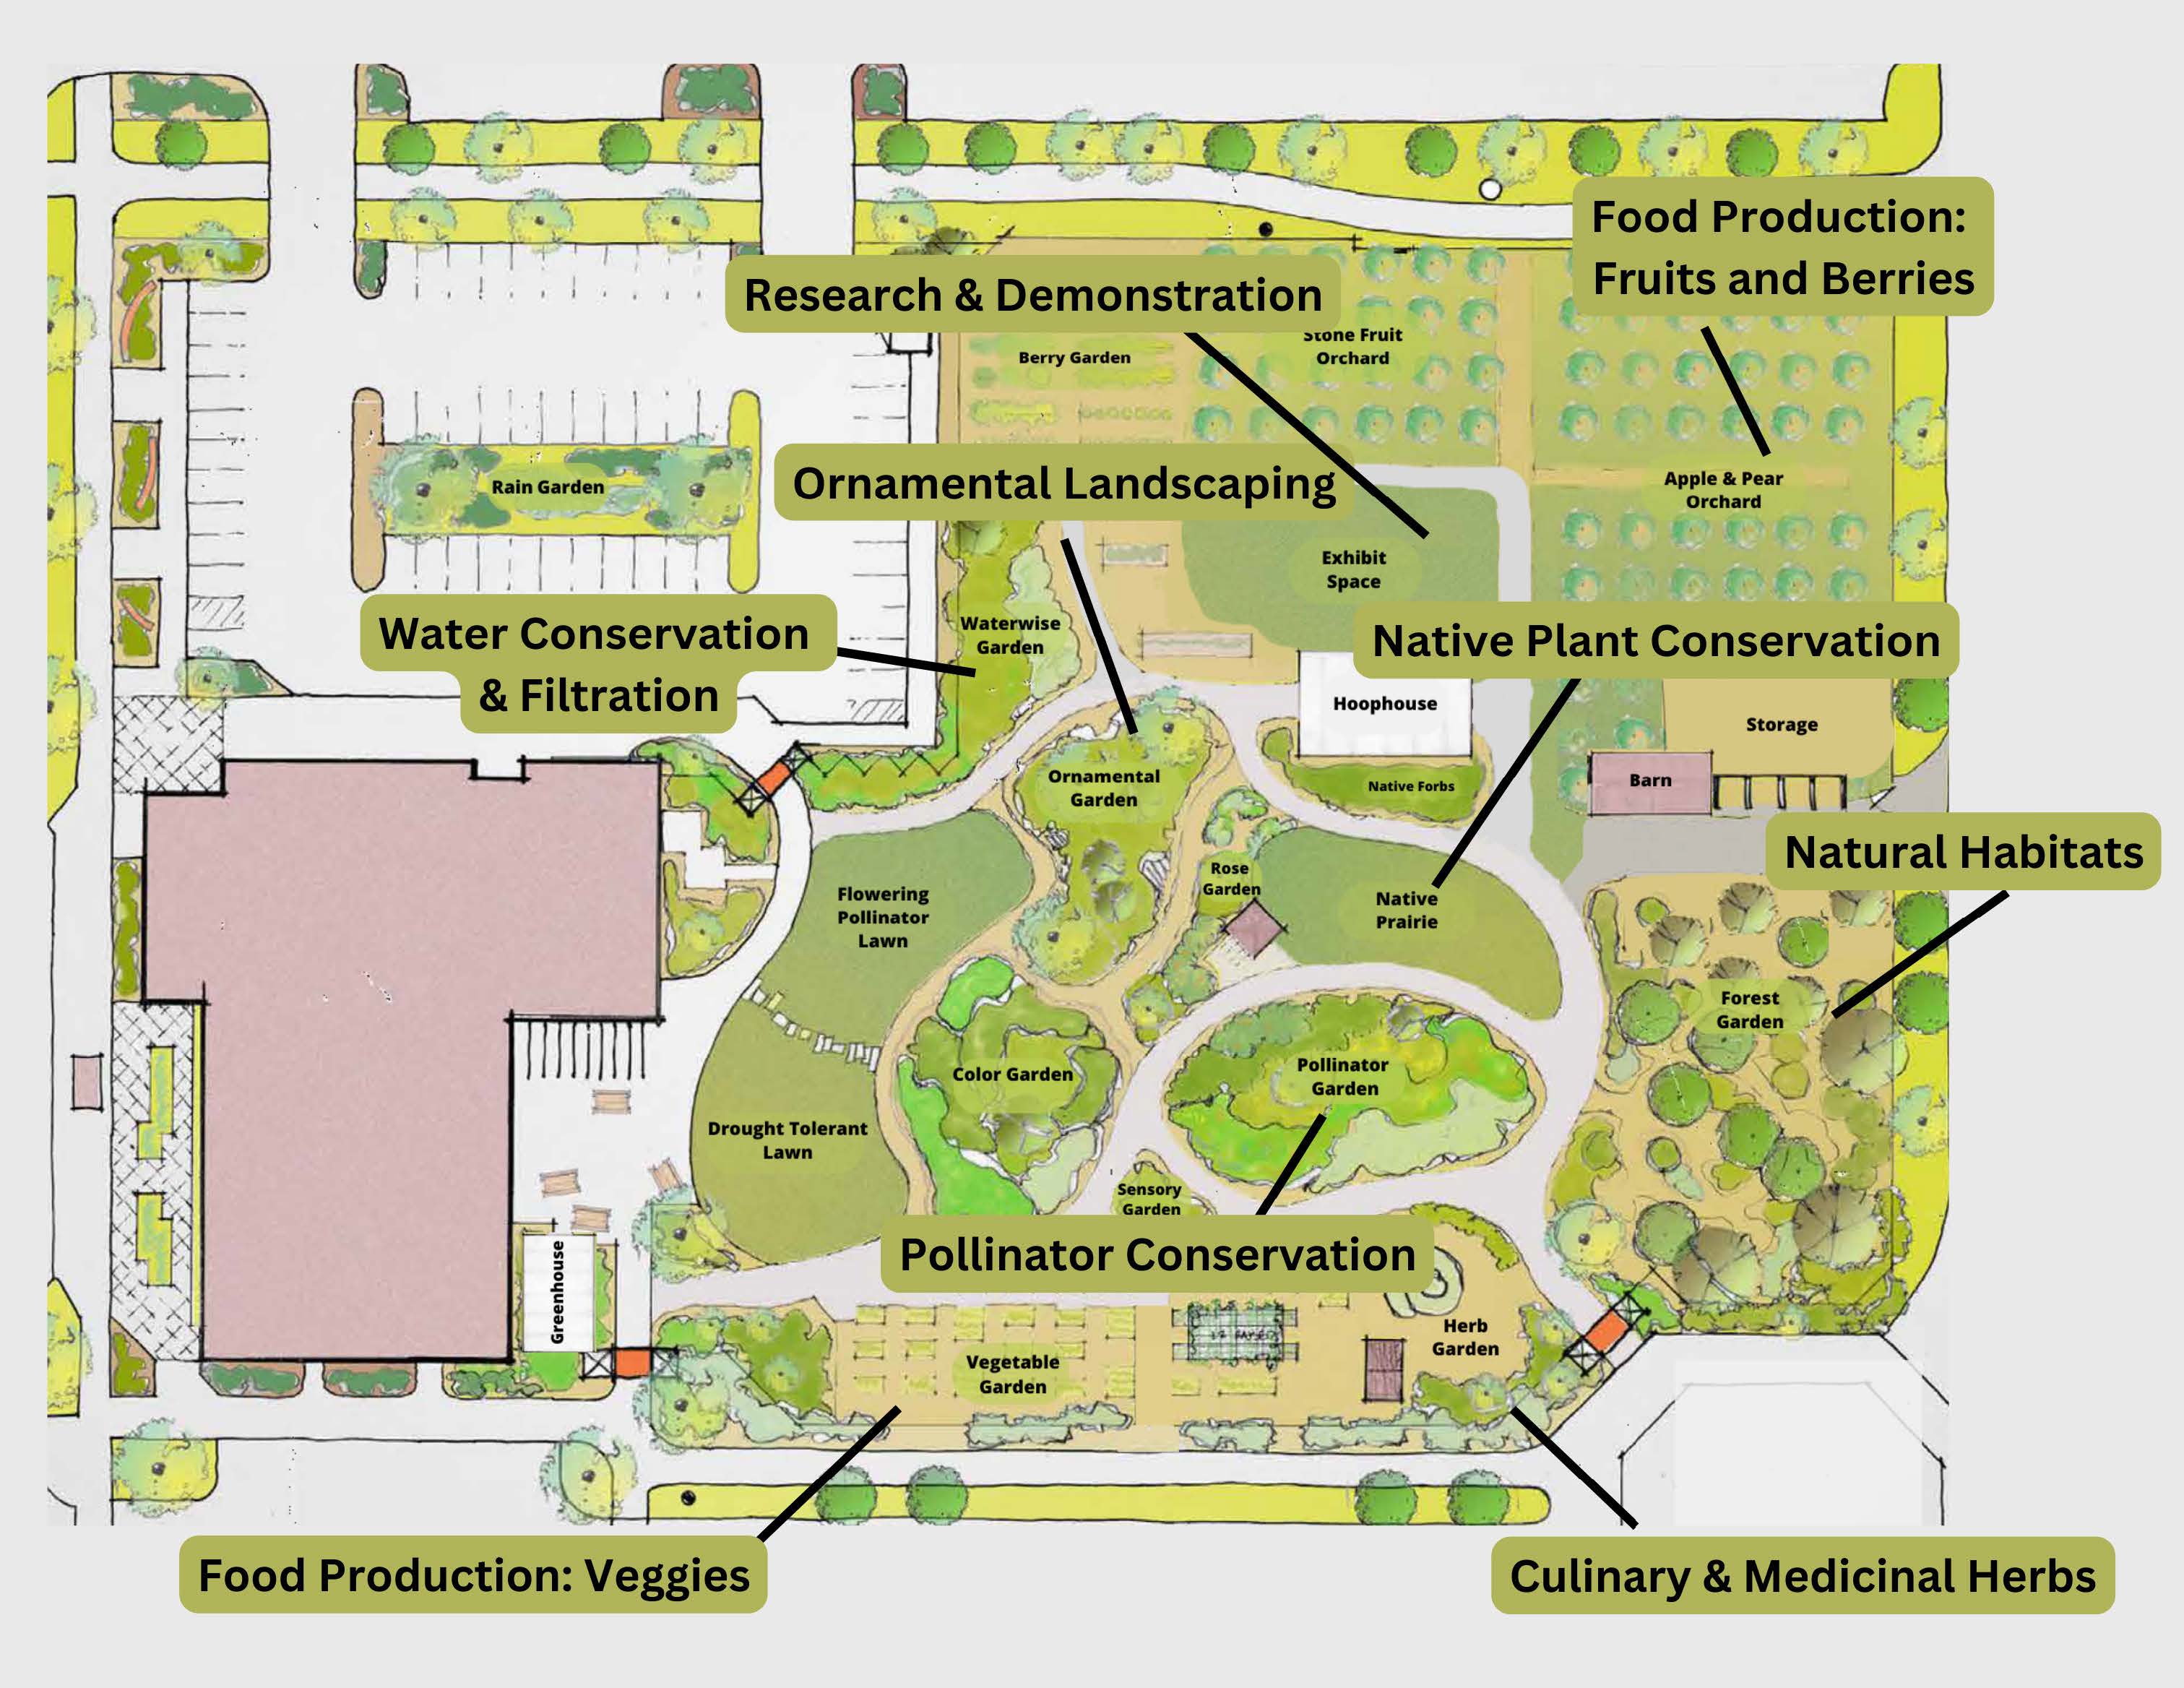 A map showing the entire garden and all of the plant habitats.